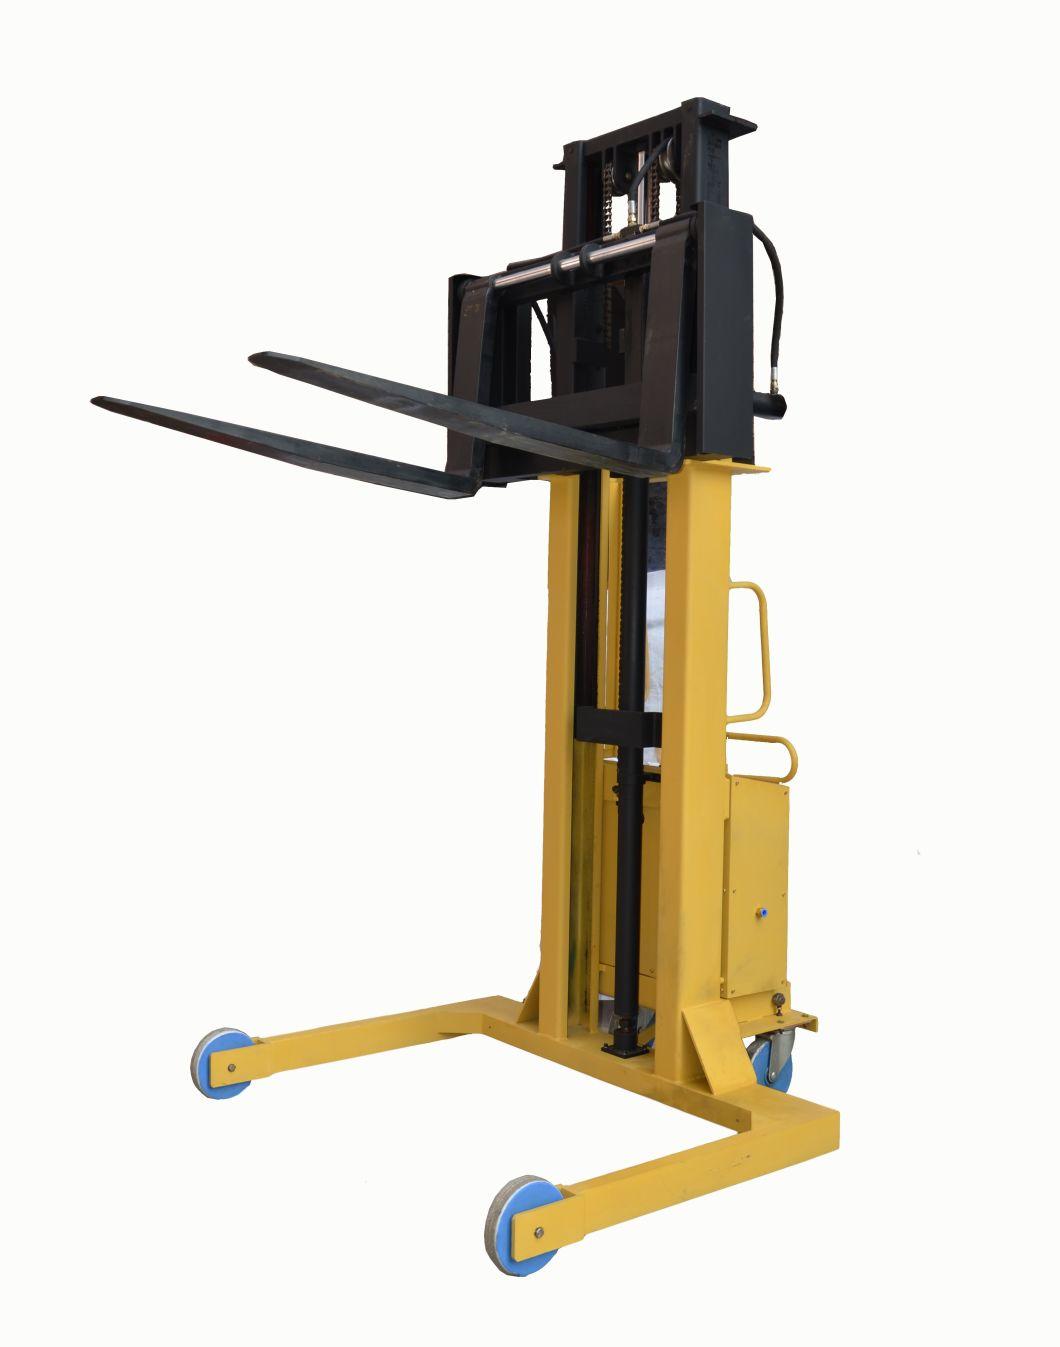 Explosion-Proof Air Chemical Equipment Stacker